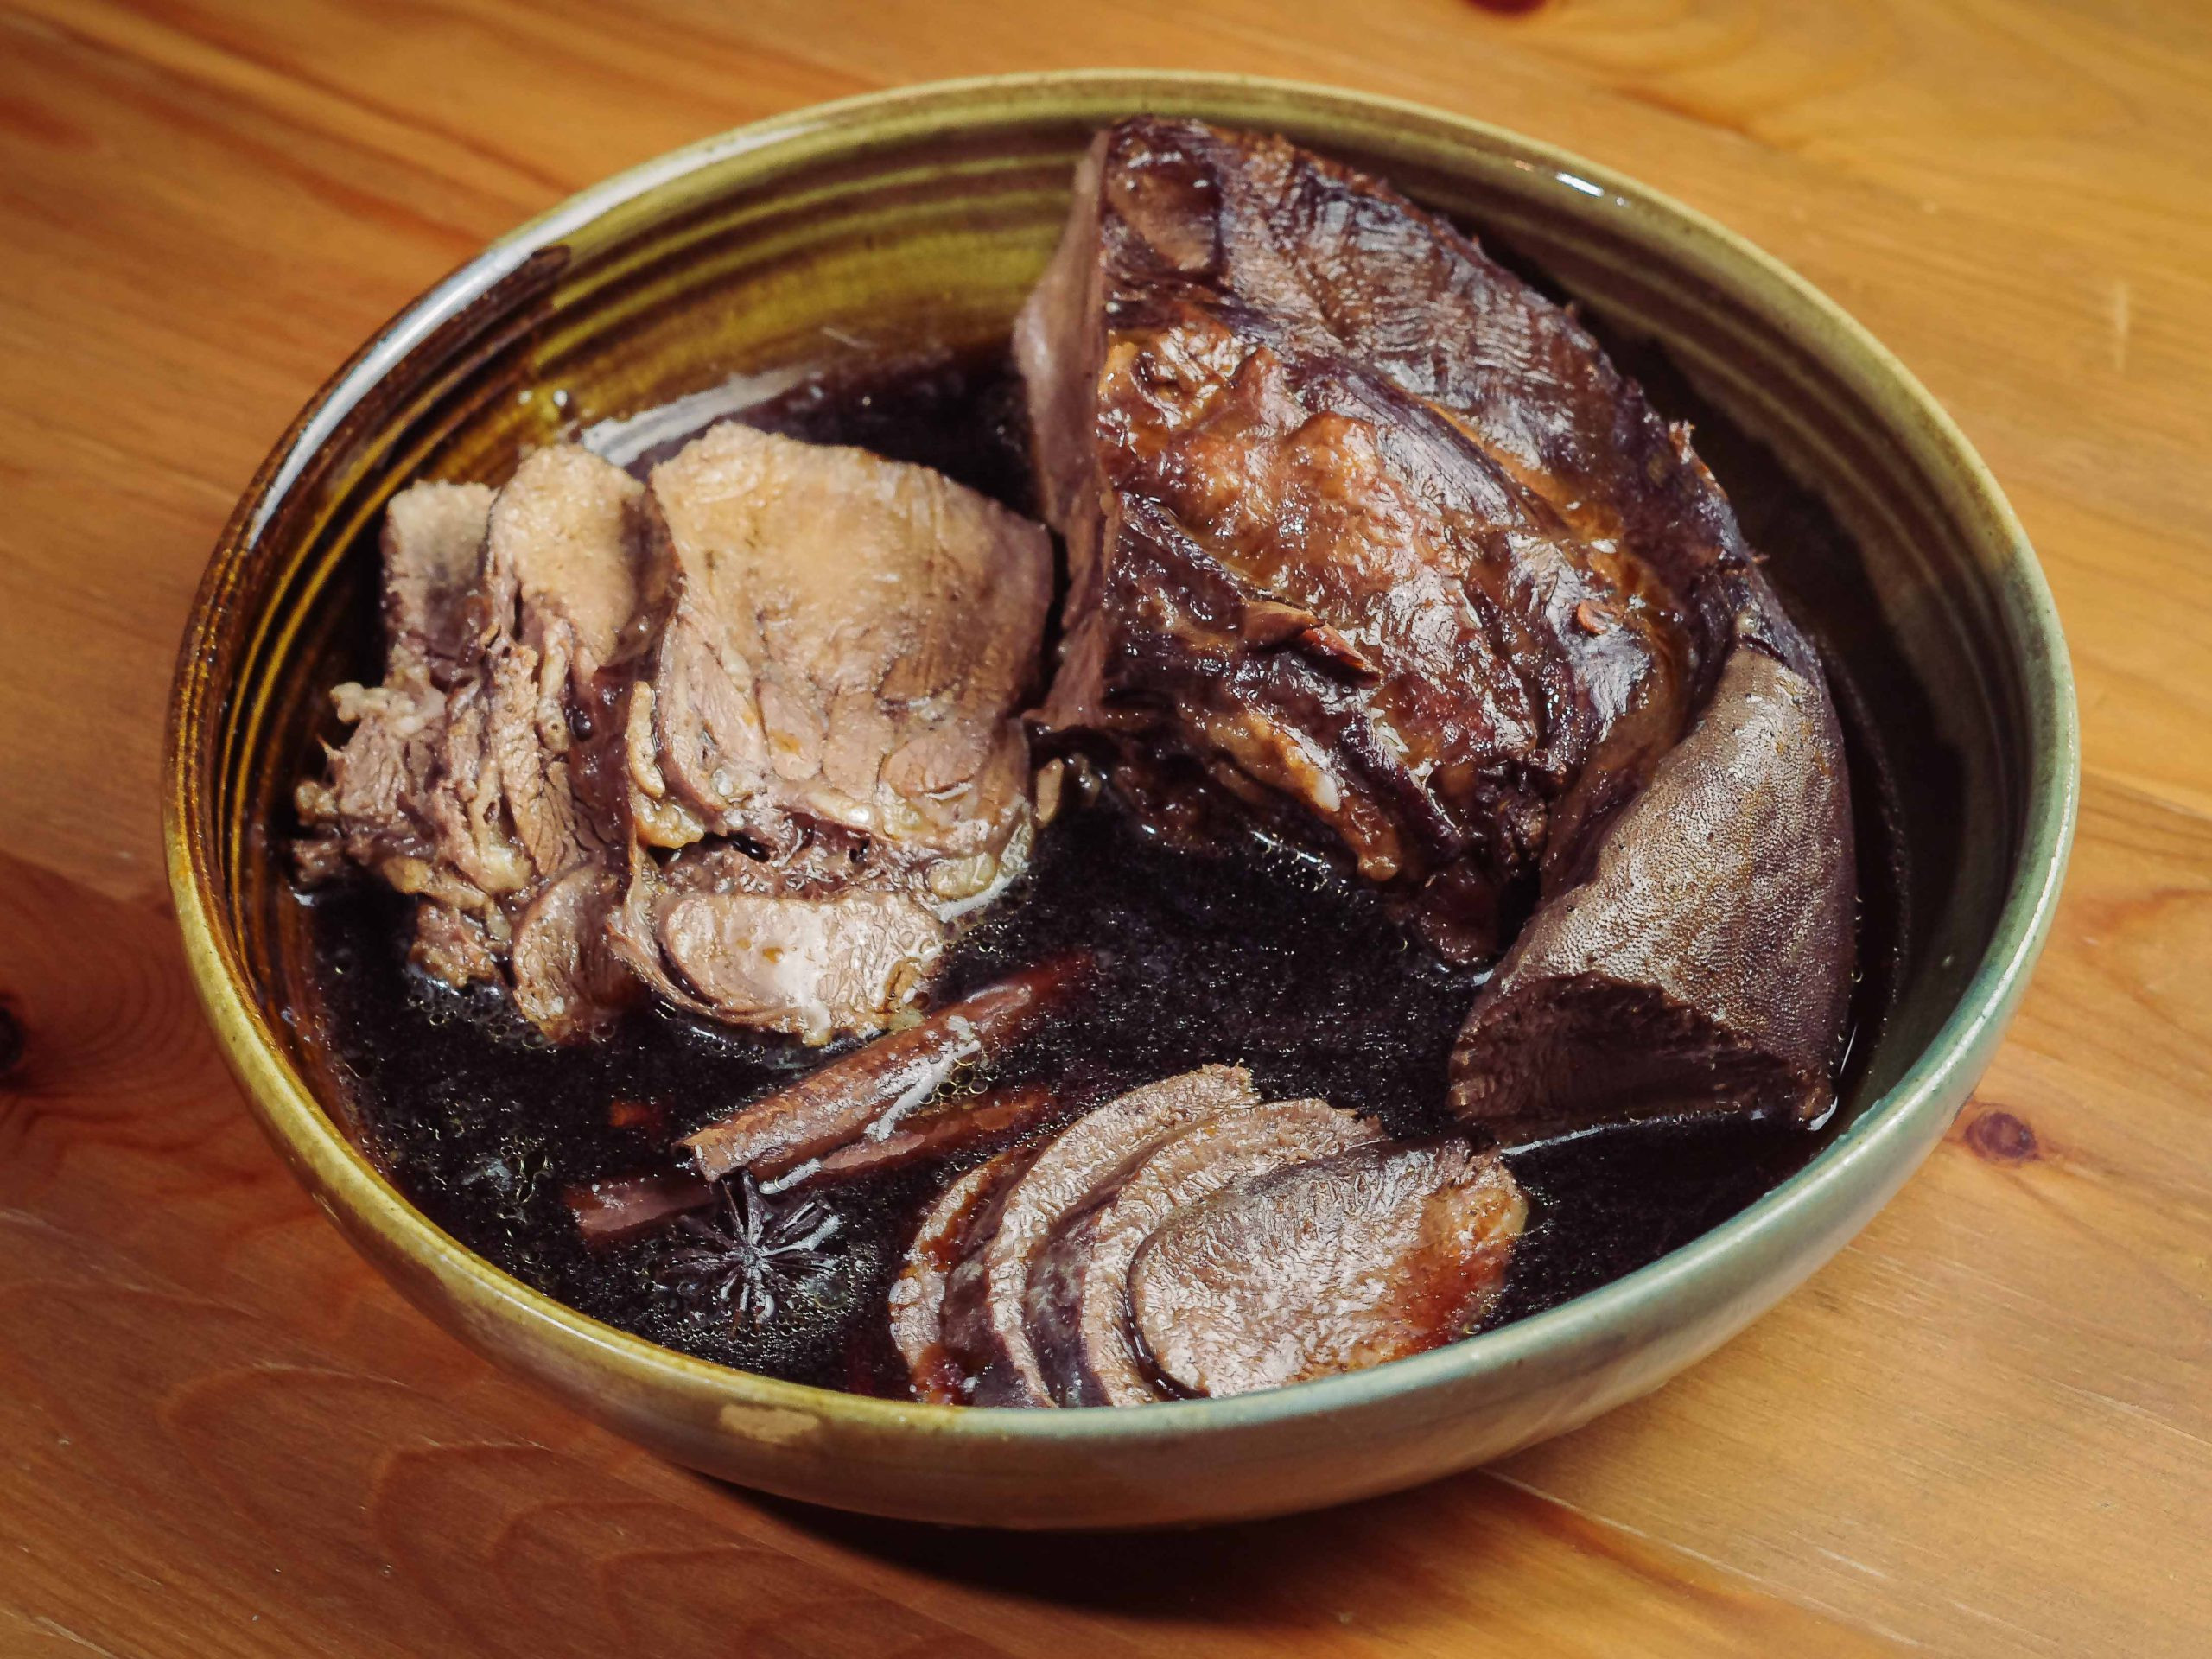 Slices of braised beef tongue are nestled in a green-brown bowl, on a wooden table.